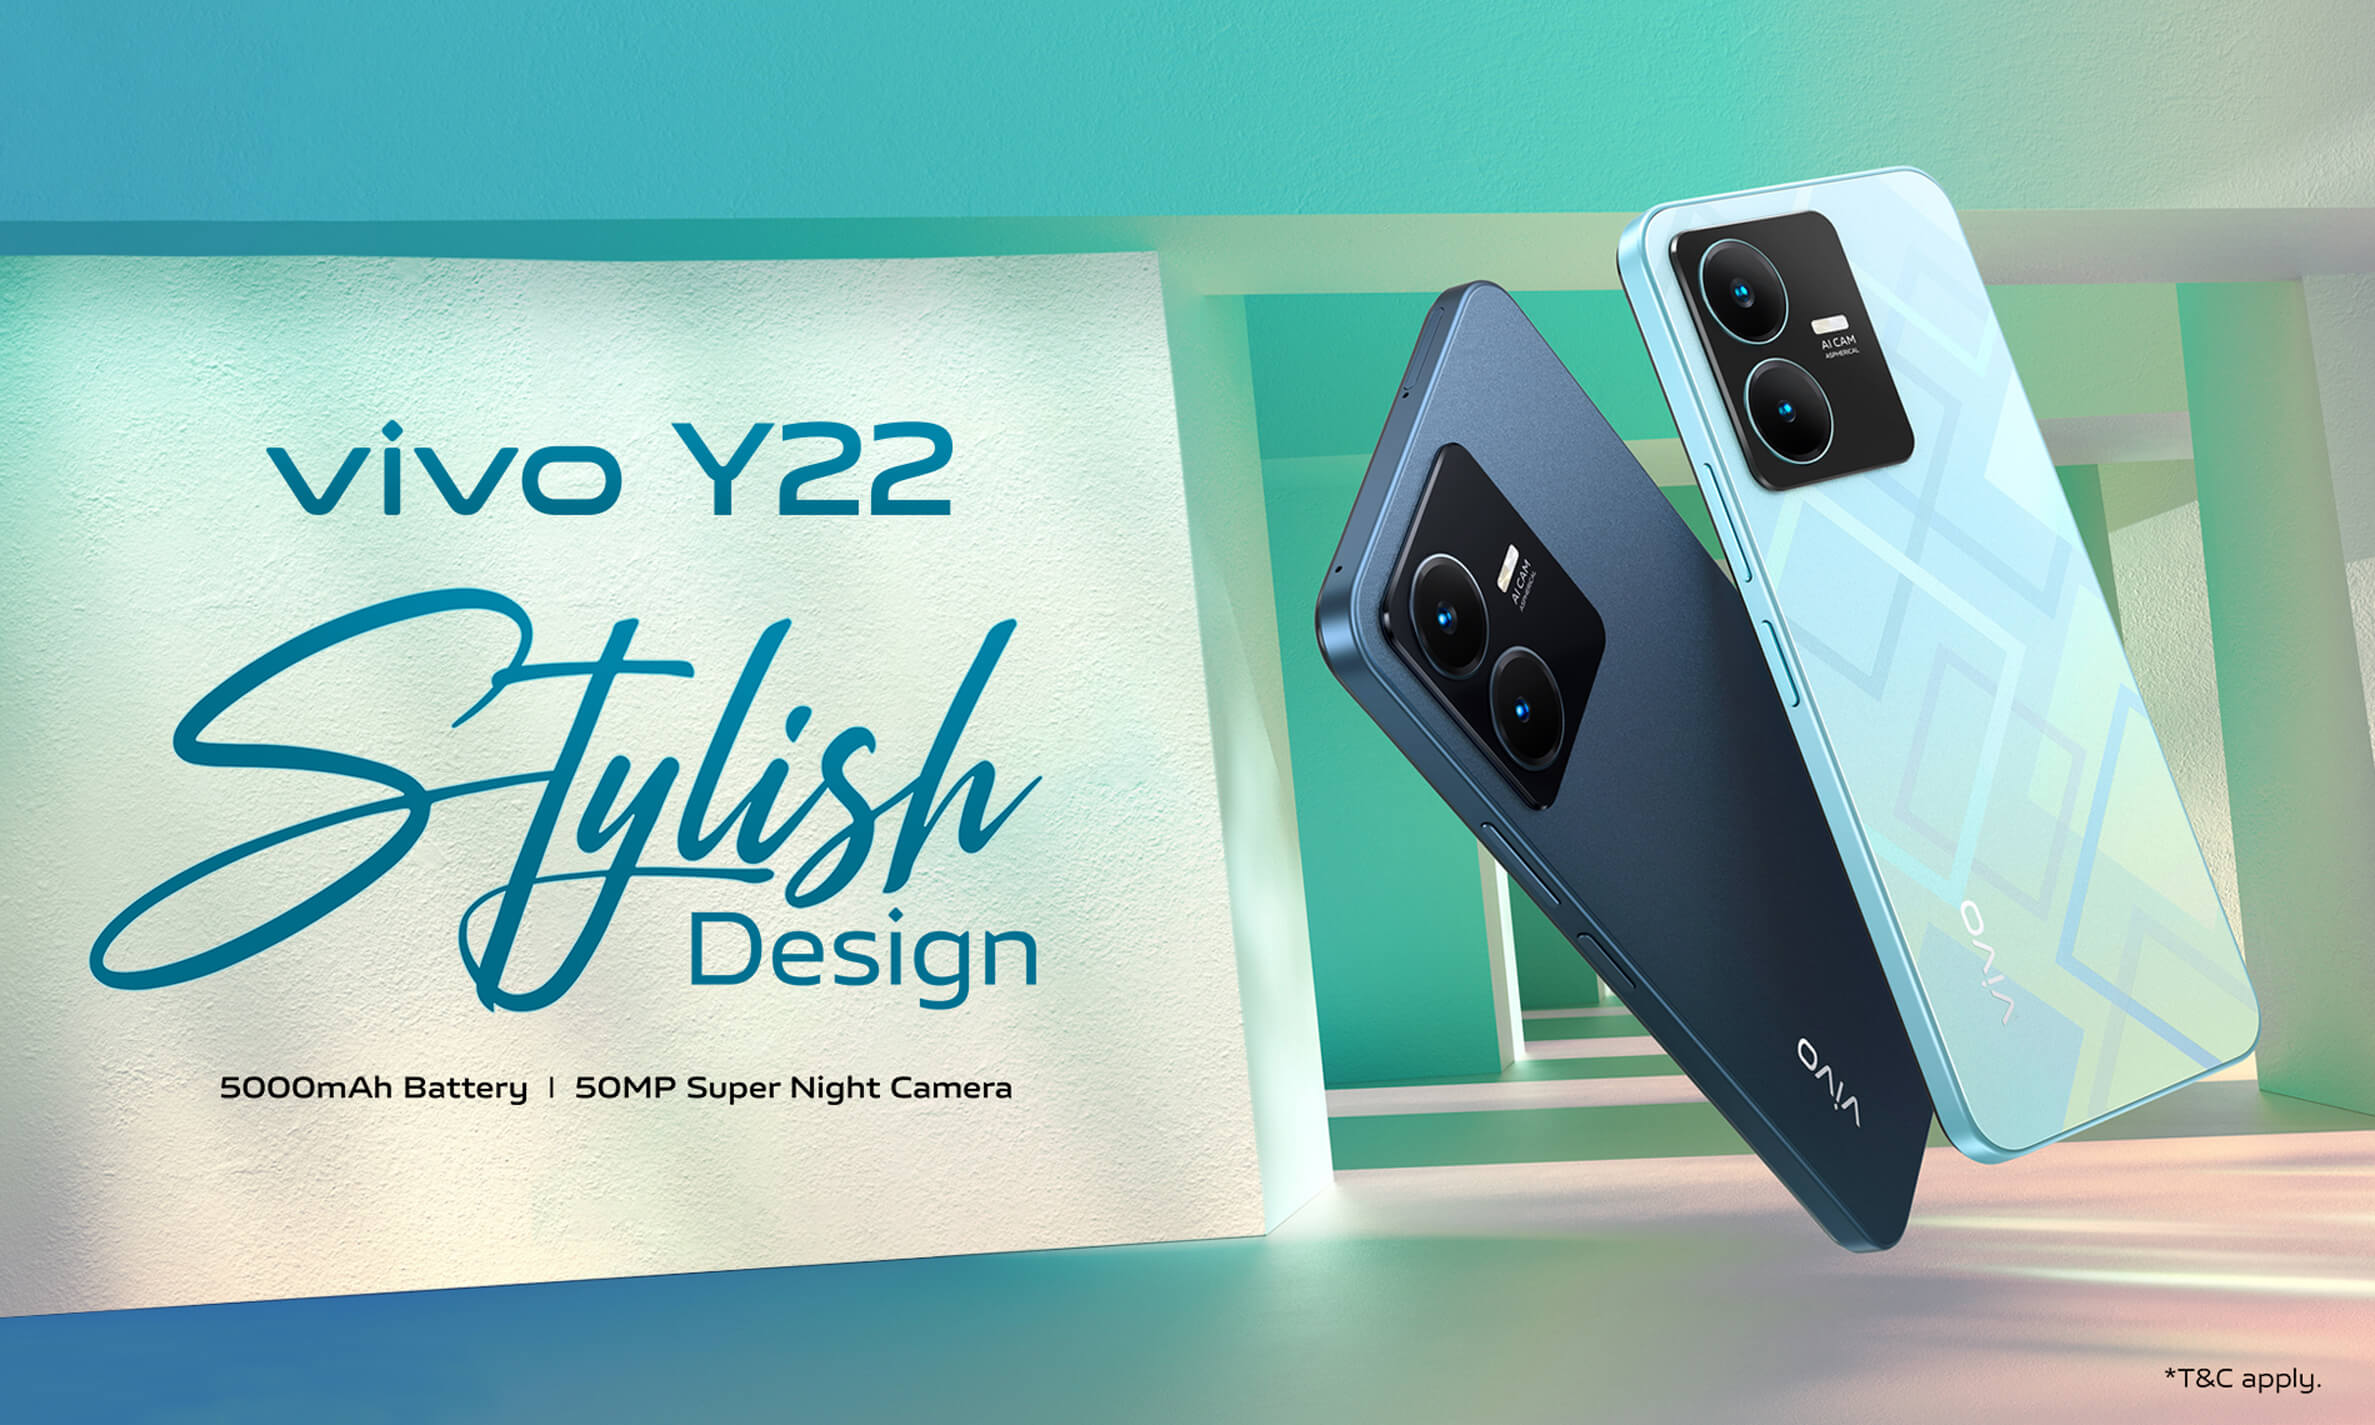 vivo Strengthen its Y series portfolio with the launch of Y22 in India